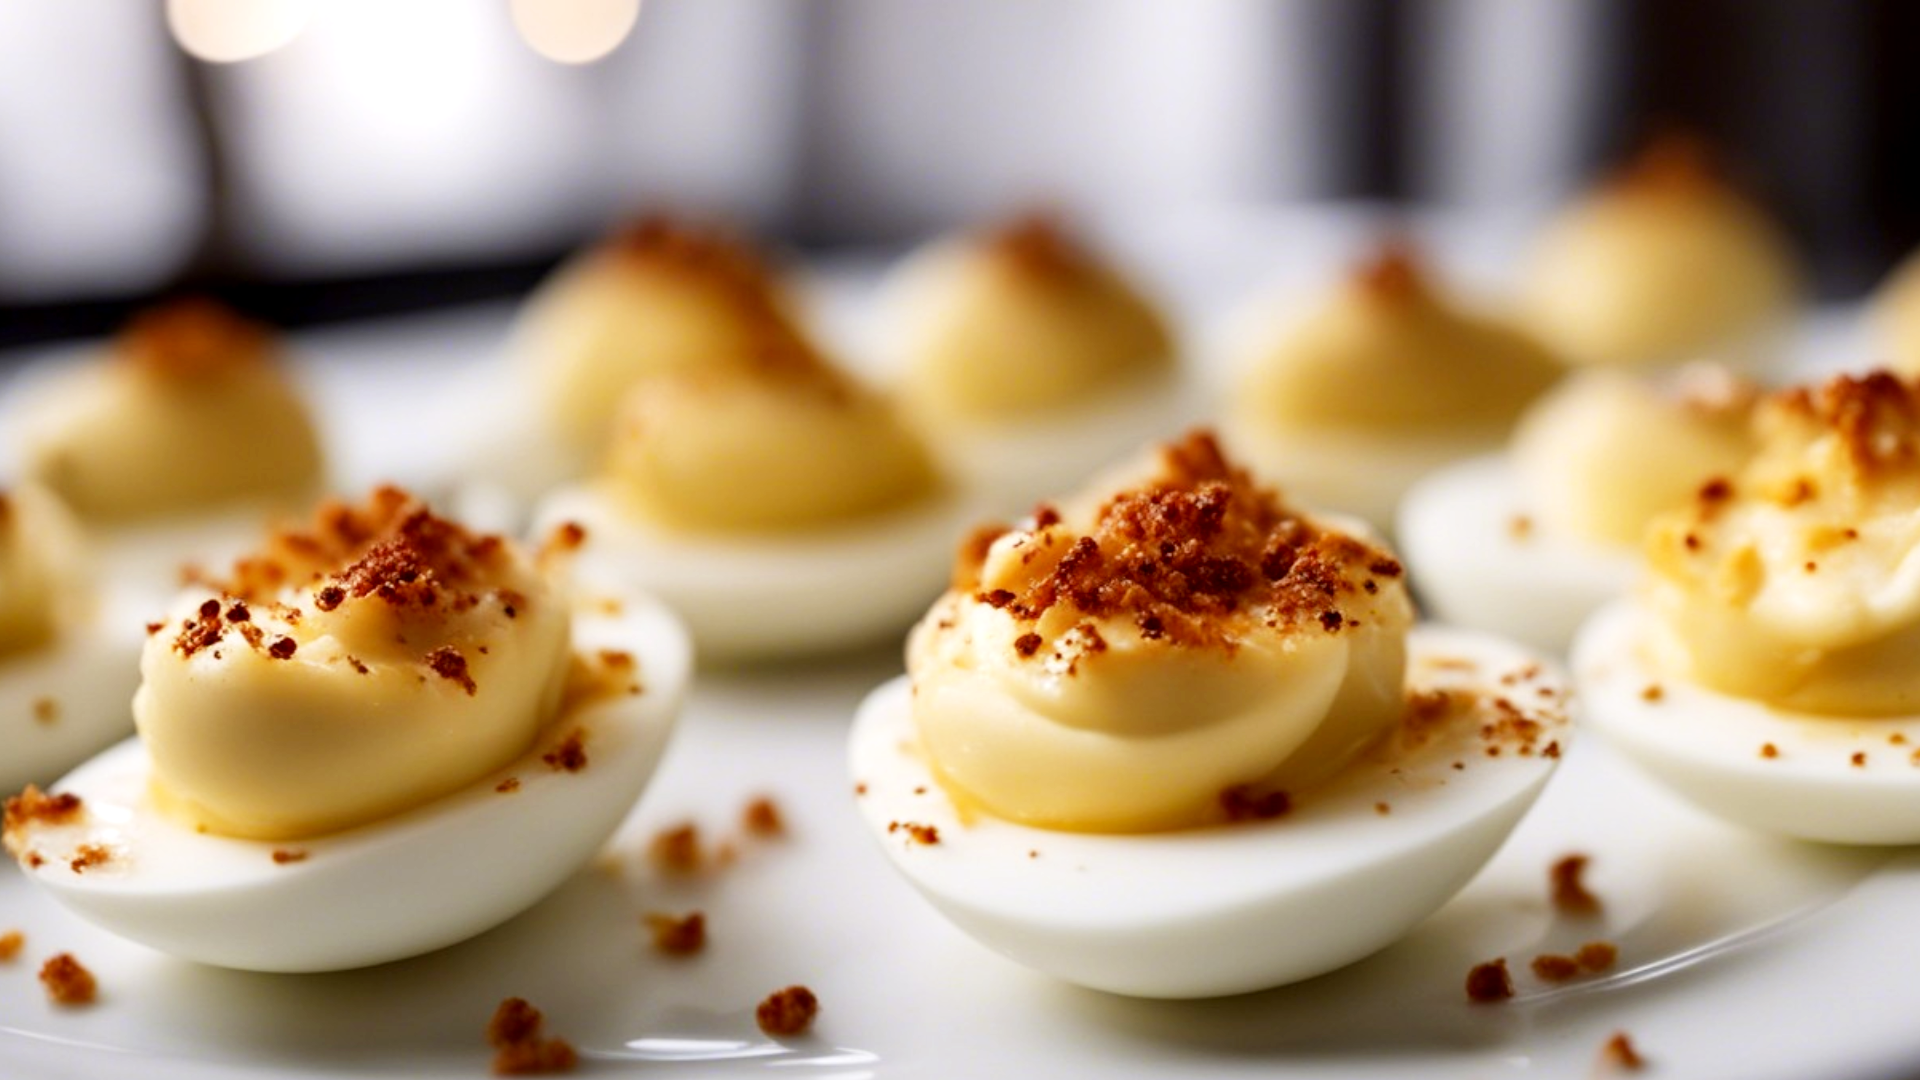 Smoked Deviled Eggs Recipe {How to Make Deviled Eggs the Easy Way}